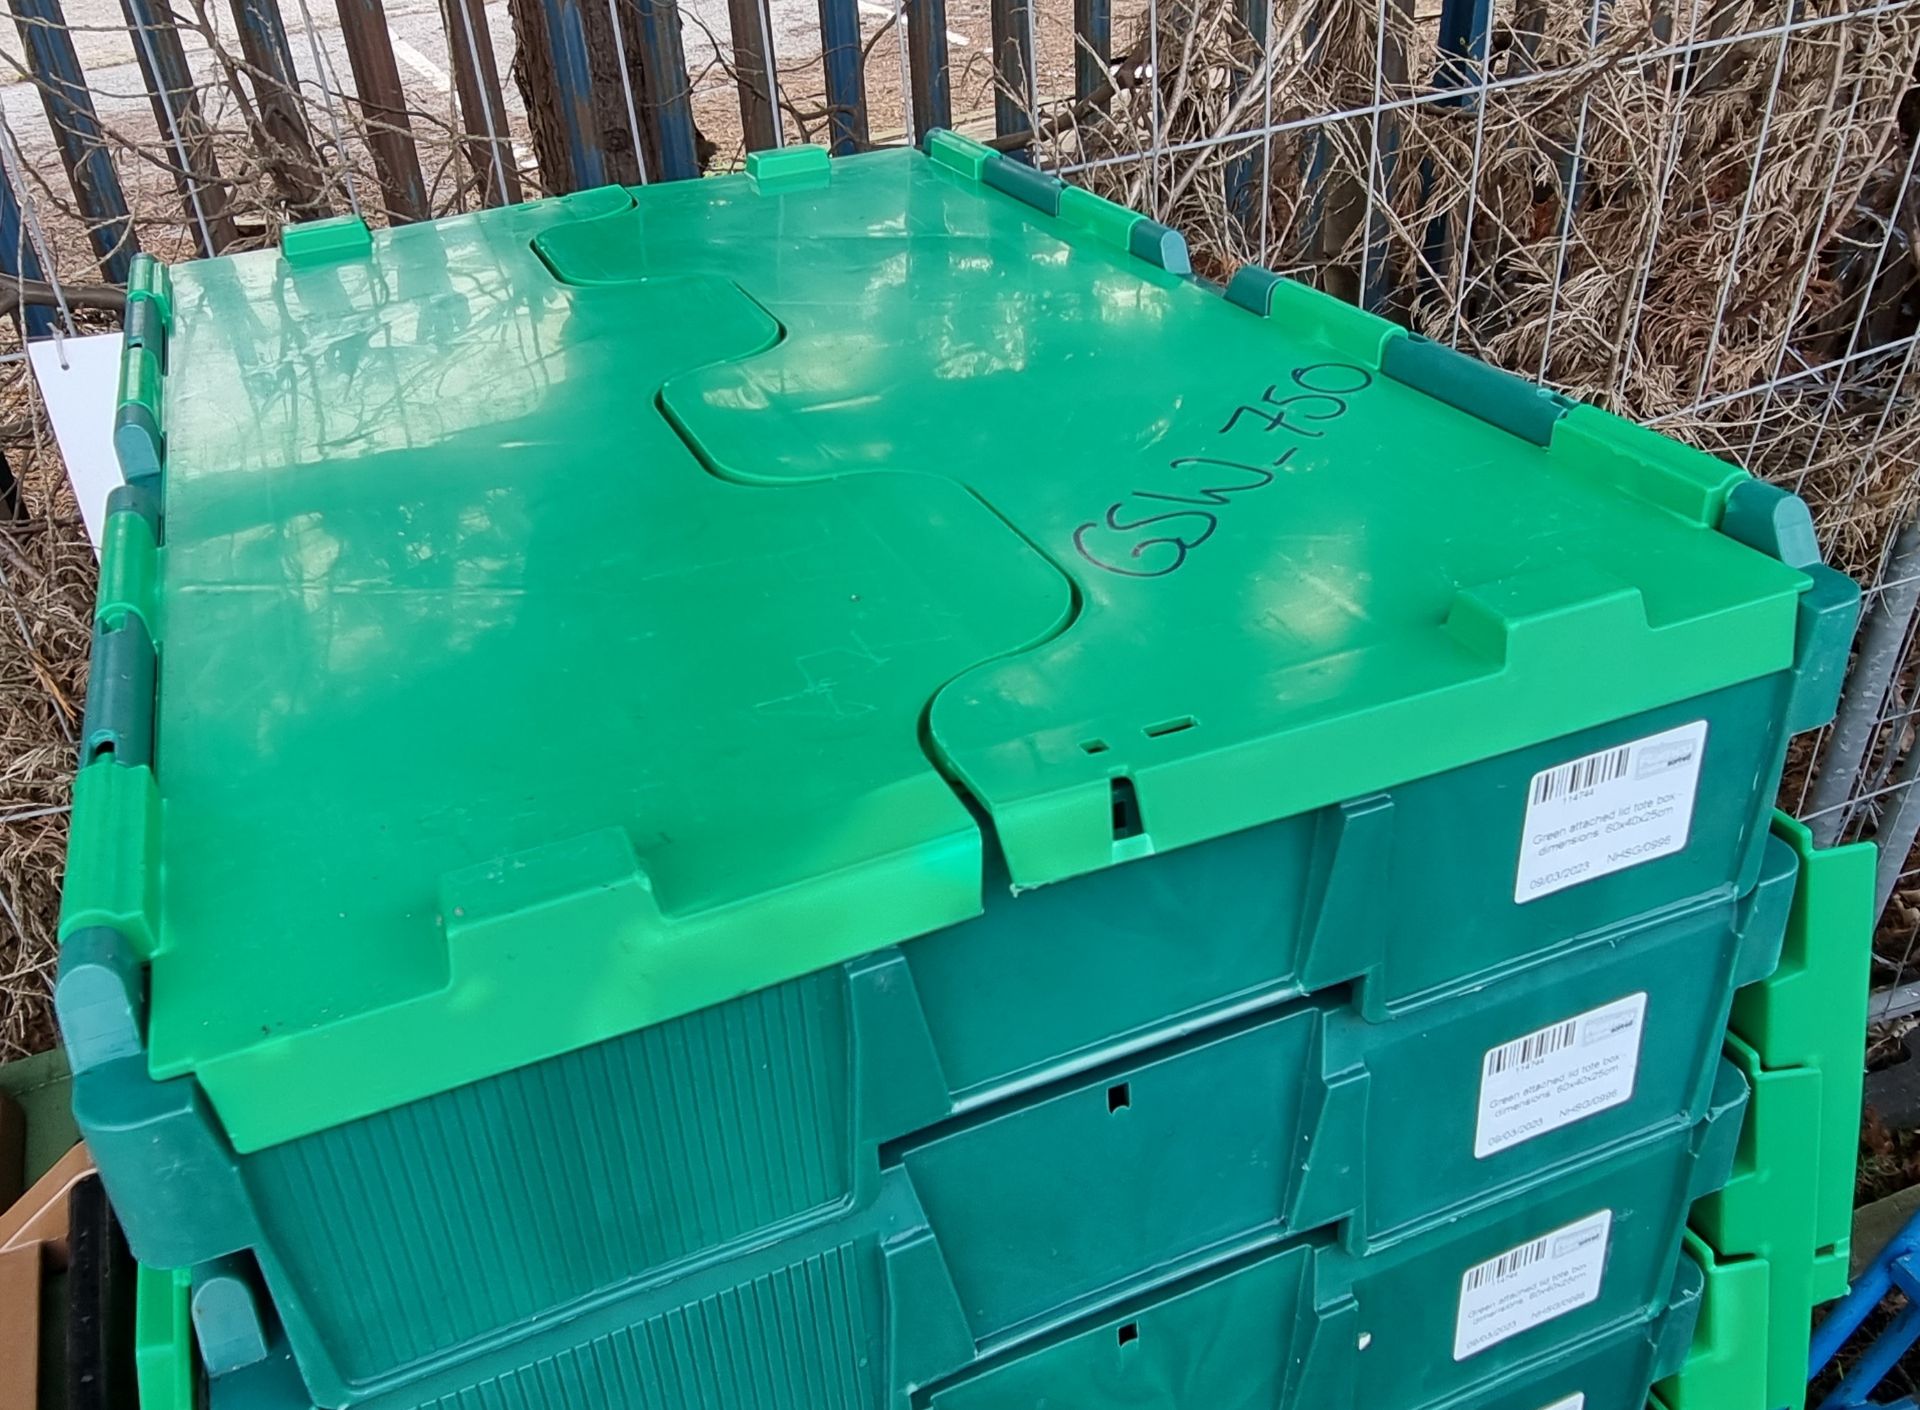 9x Green attached lid tote boxes - dimensions: 60 x 40 x 25cm - Image 3 of 3